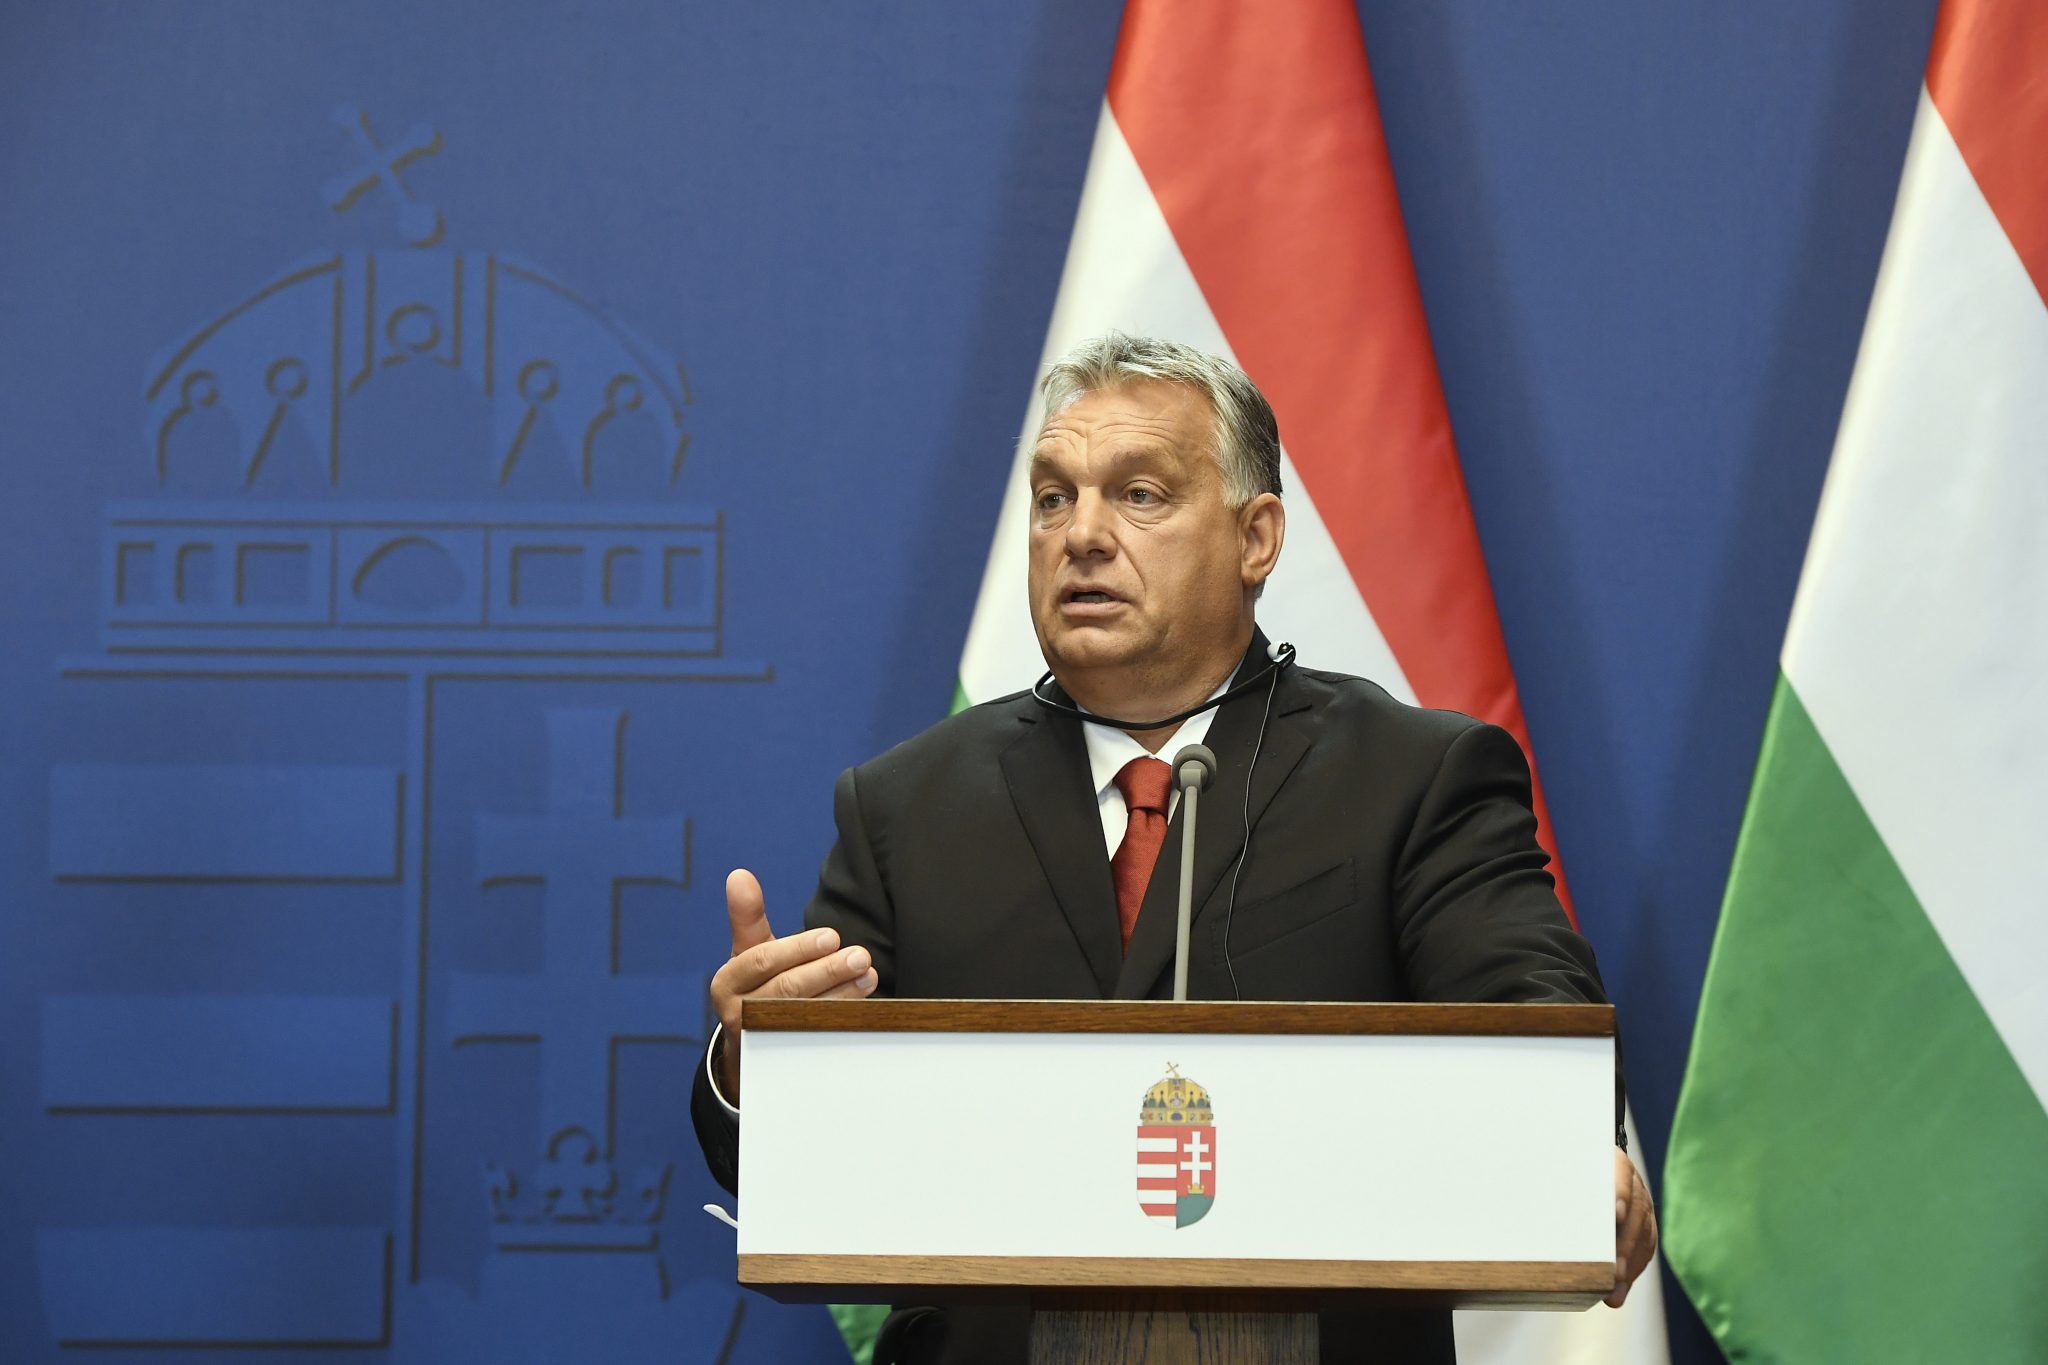 Orbán on Brexit: 'There Is Life Outside of the EU'